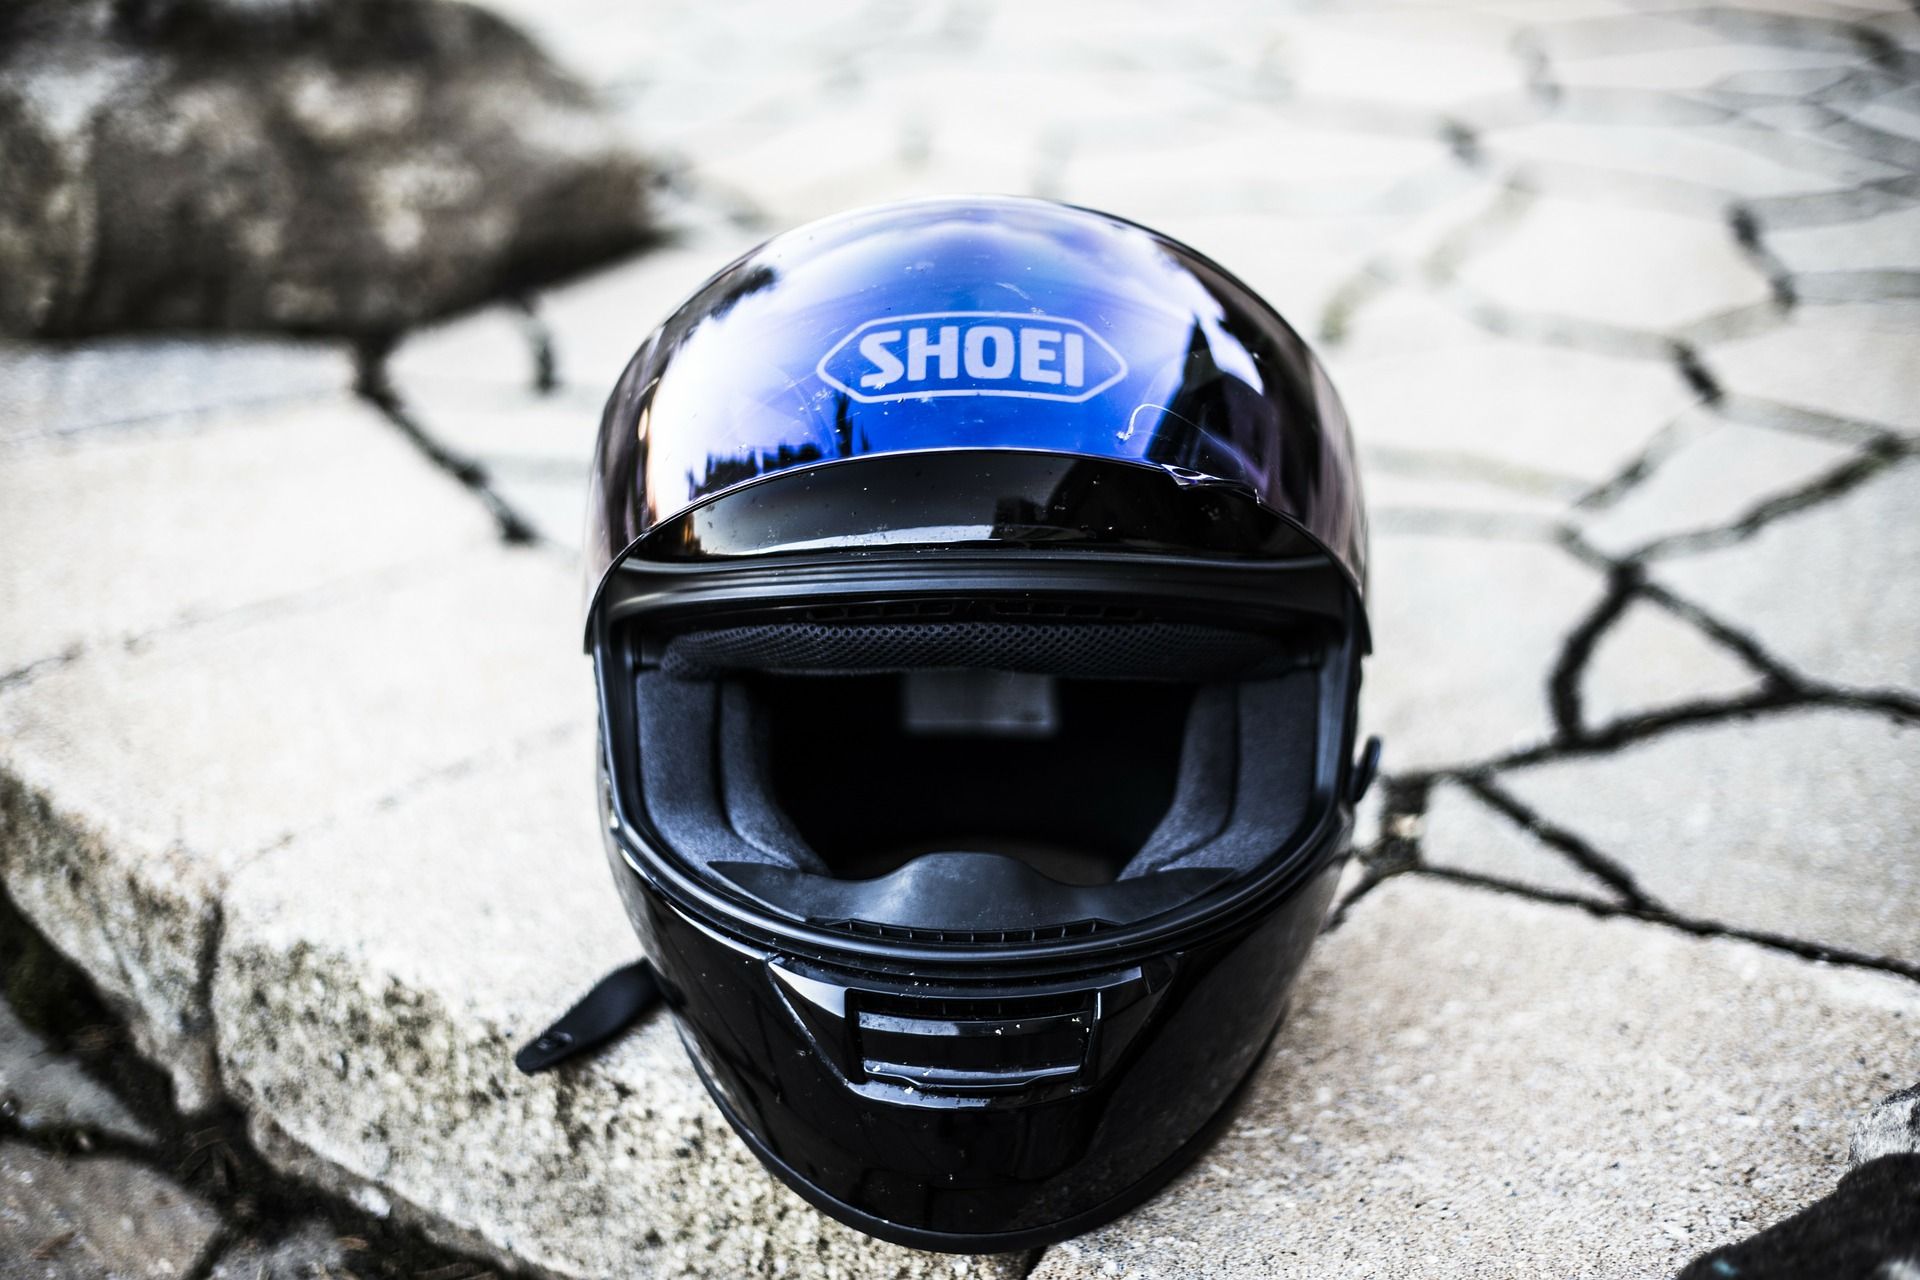 An in depth review of all types & styles of motorcycle helmets in 2018